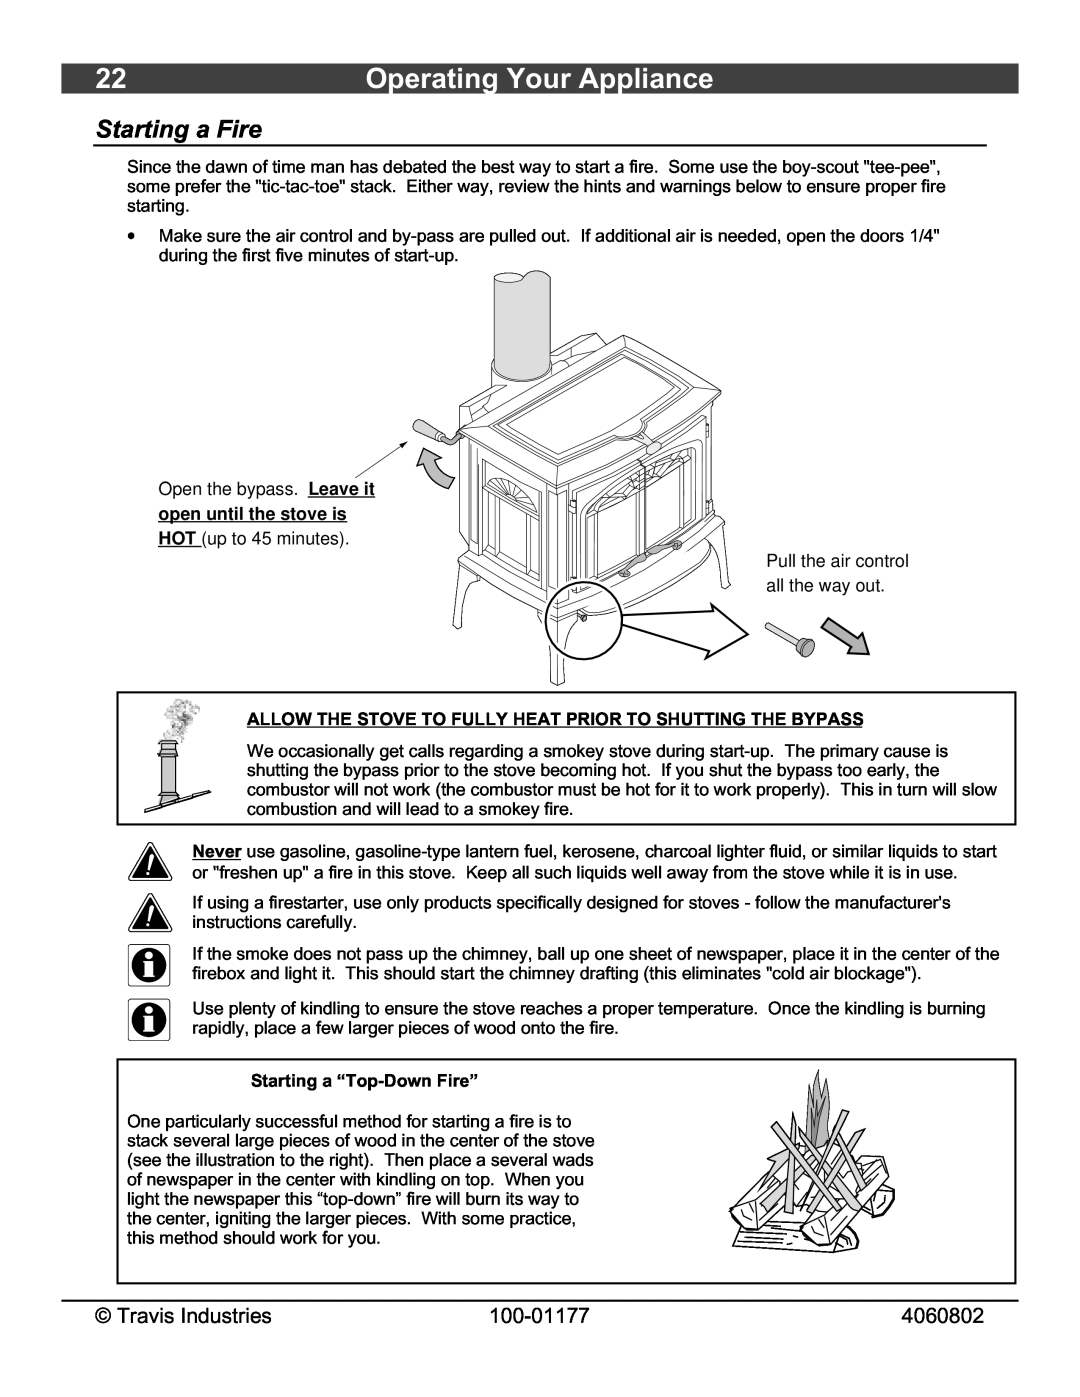 Lopi Stove owner manual Operating Your Appliance, Starting a Fire, open until the stove is, Starting a “Top-DownFire” 